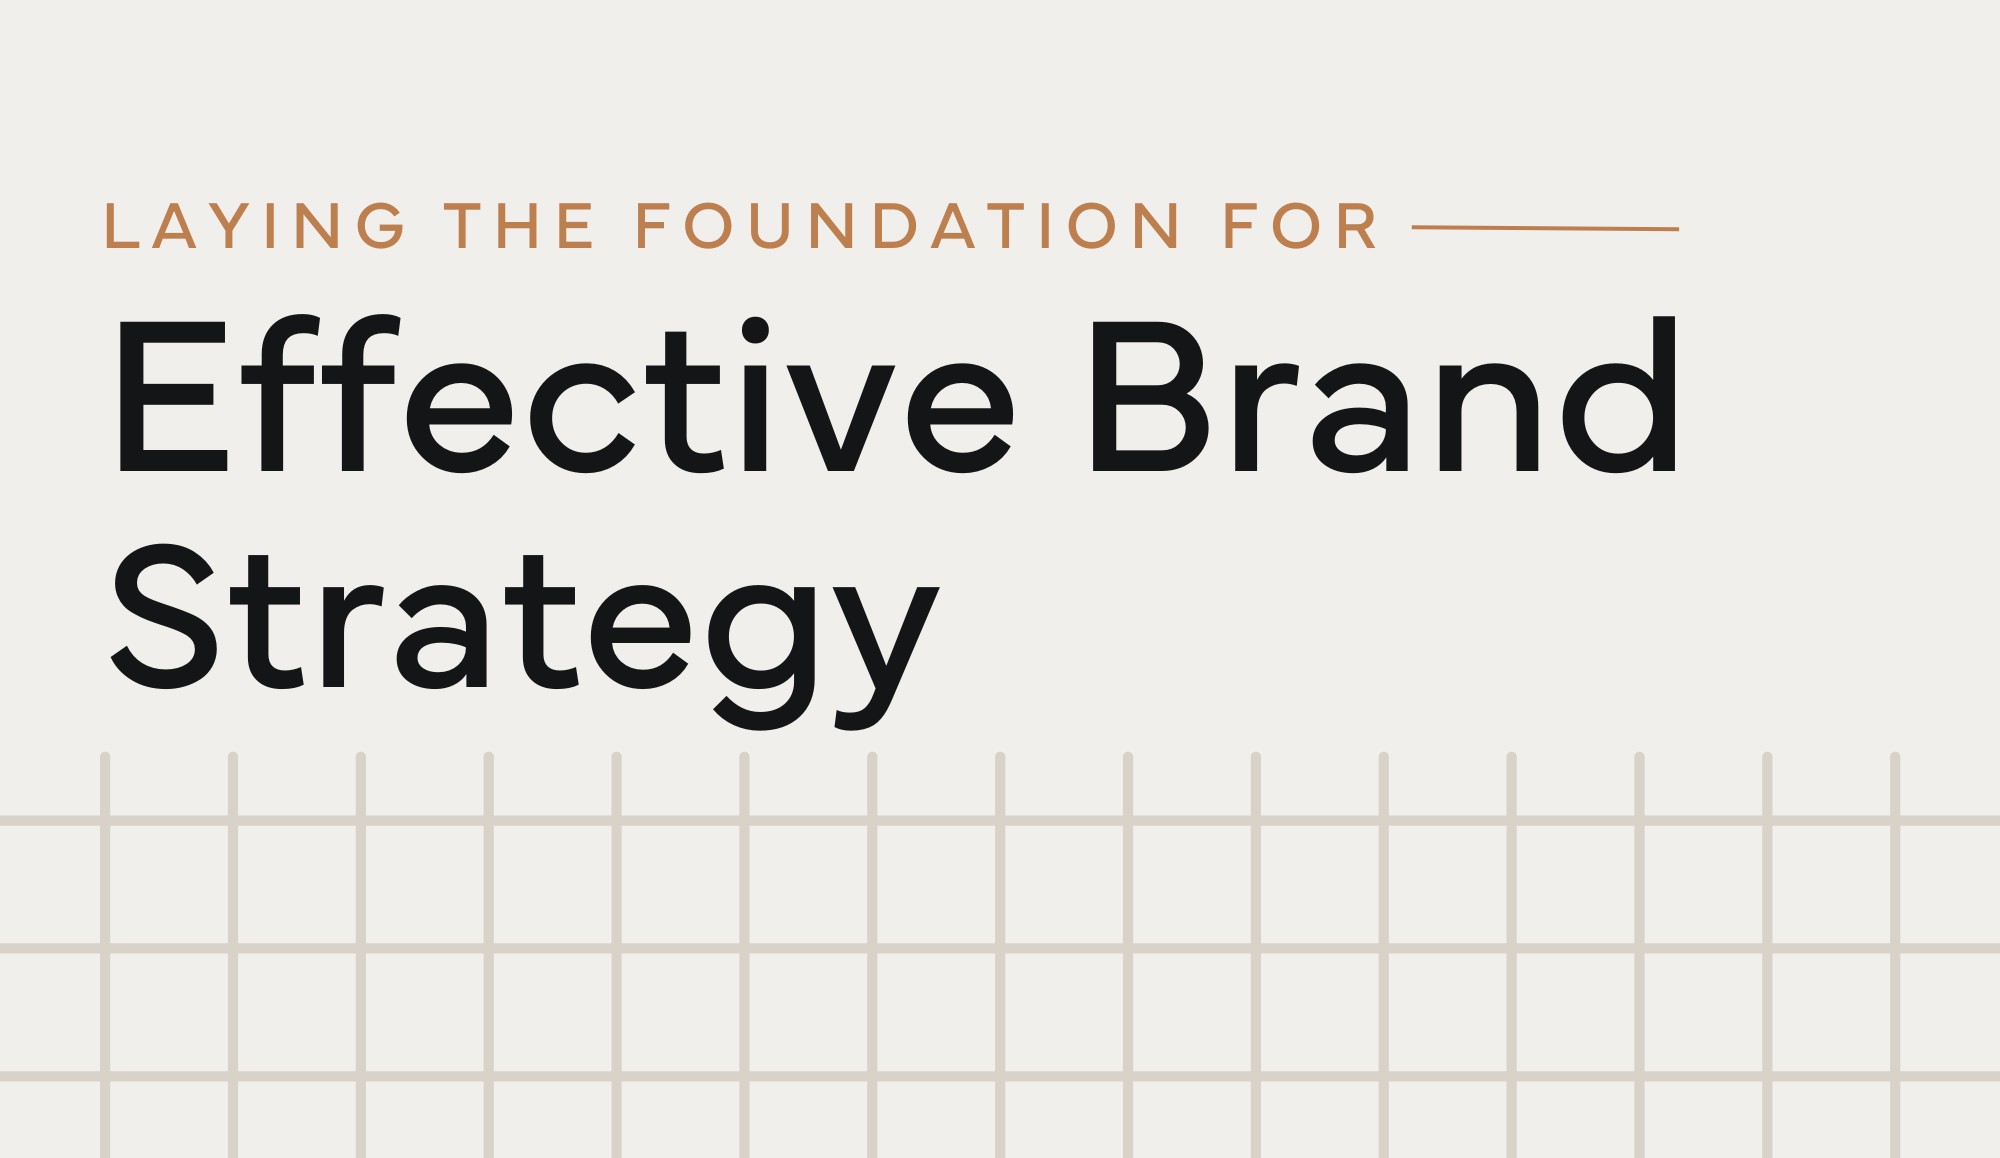 Laying the Foundation for Effective Brand Strategy